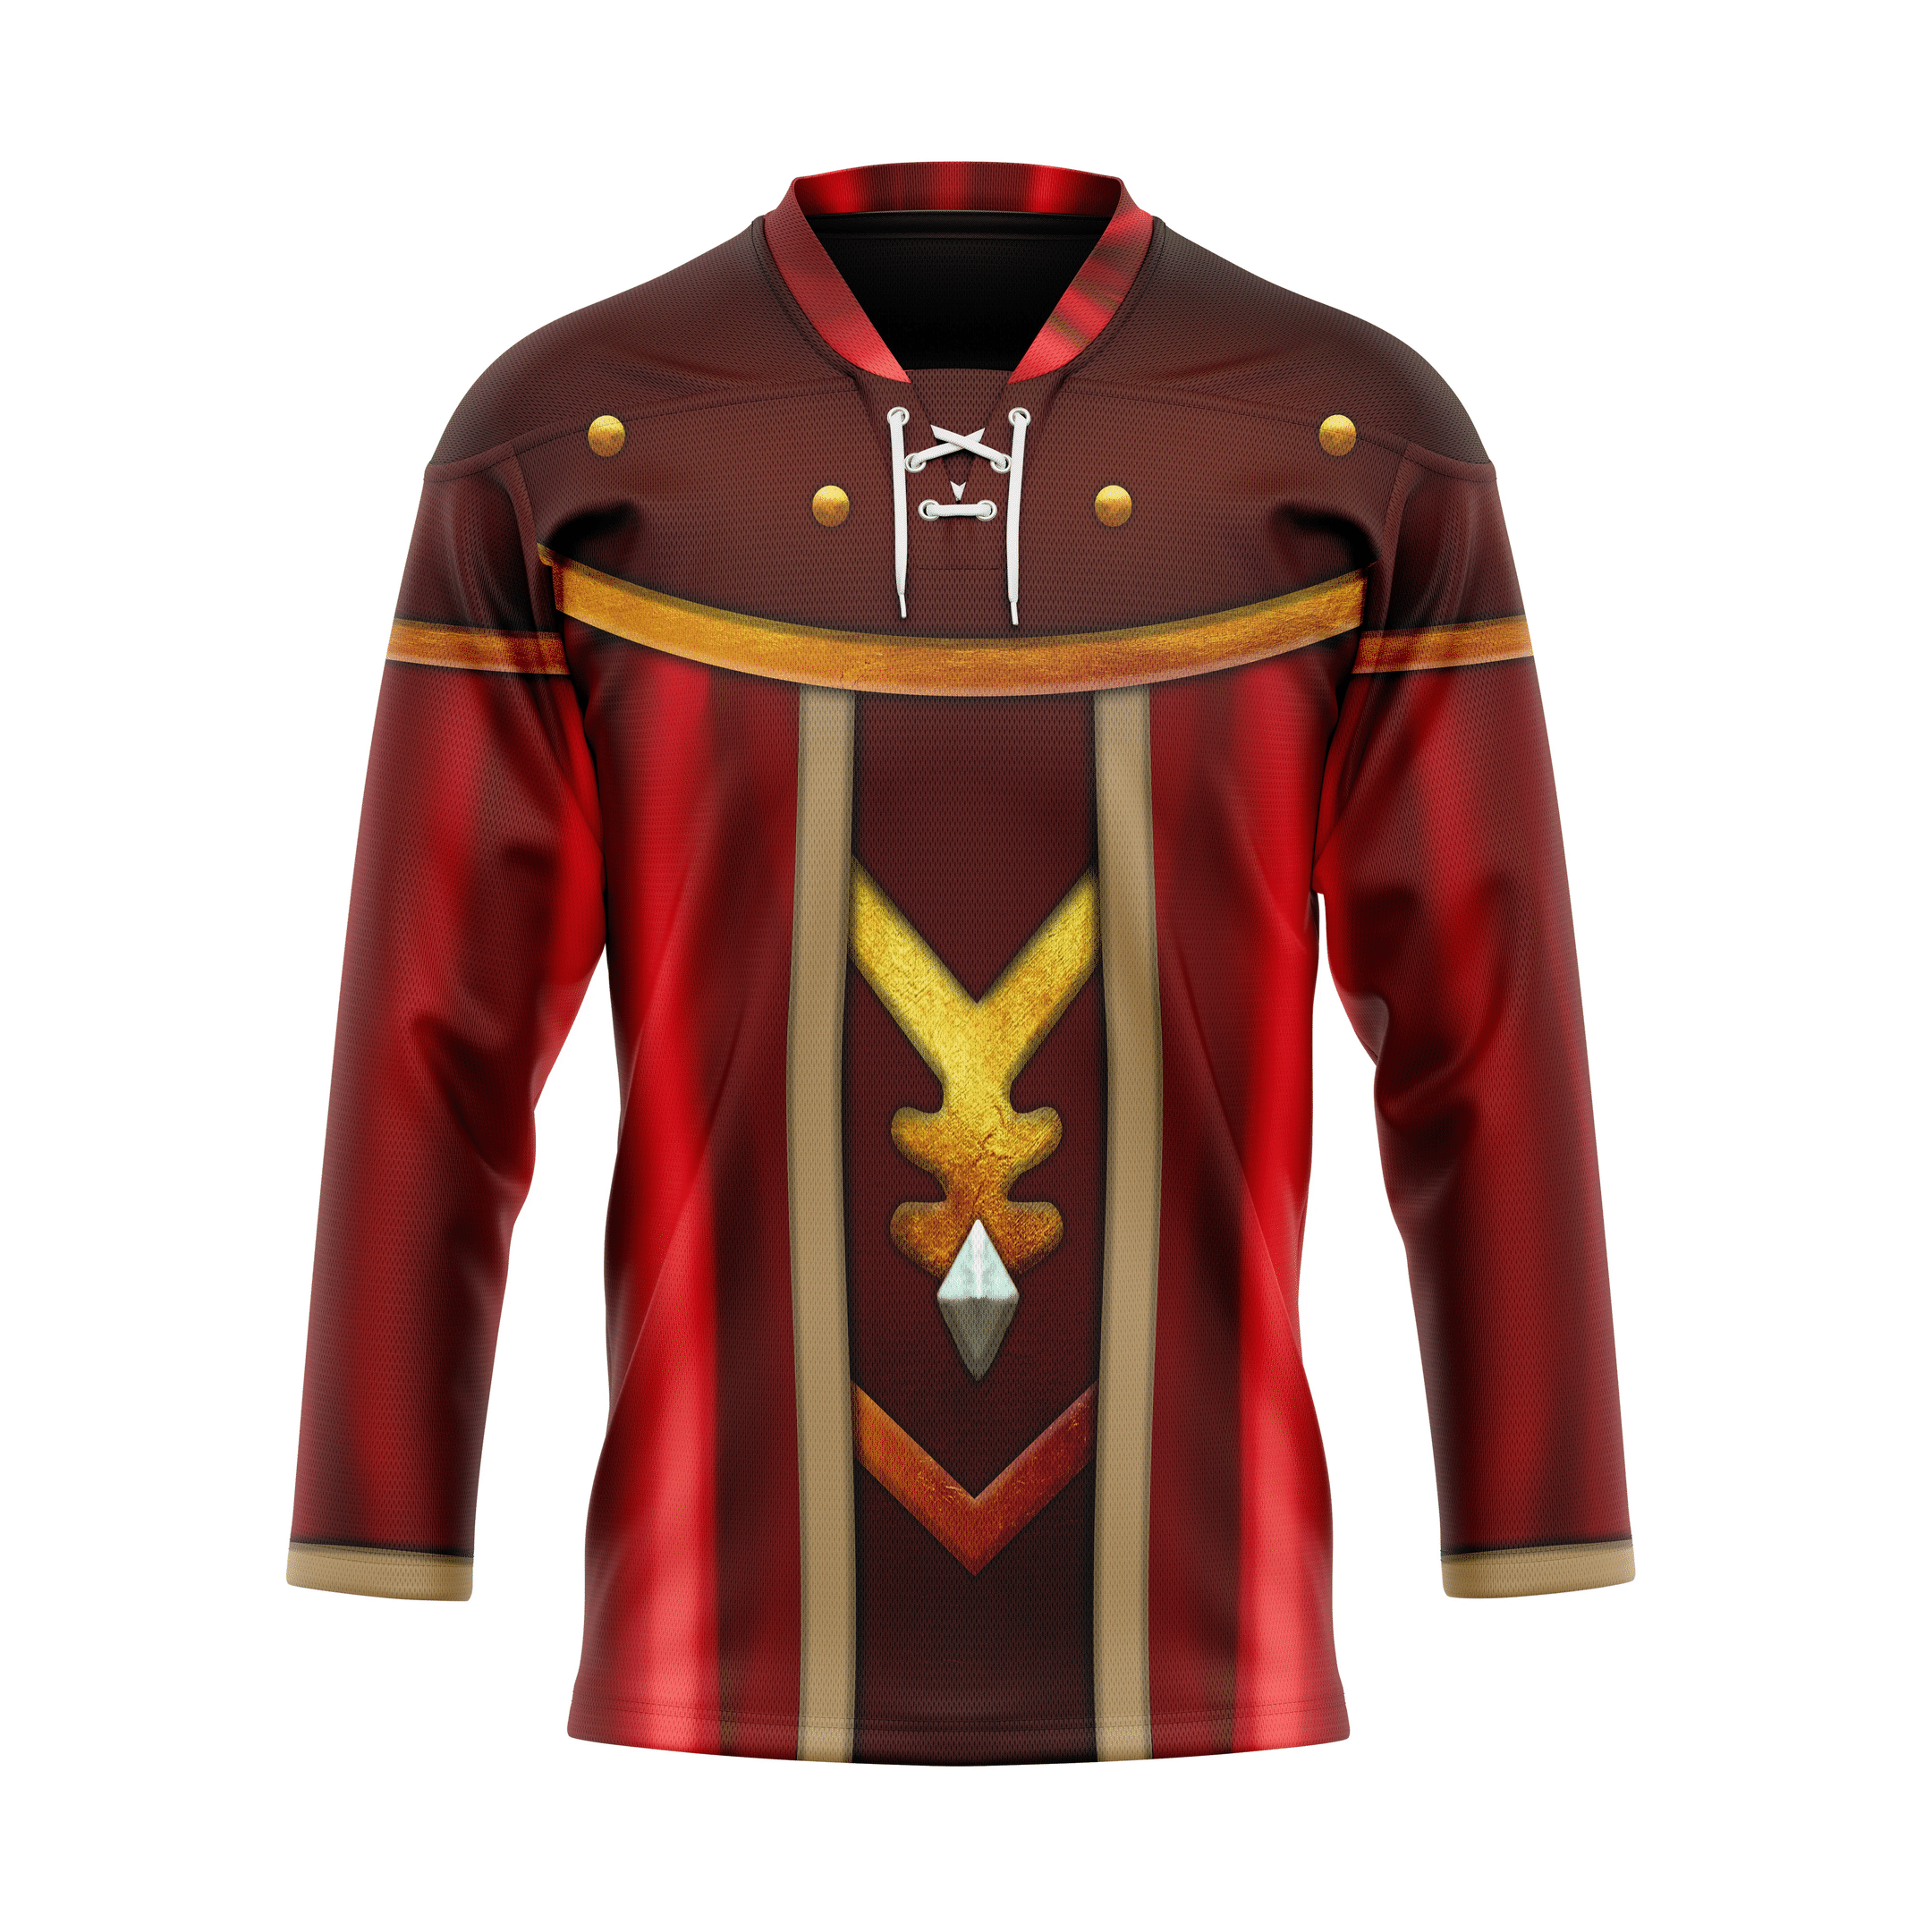 Top cool Hockey jersey for fan You can buy online. 127